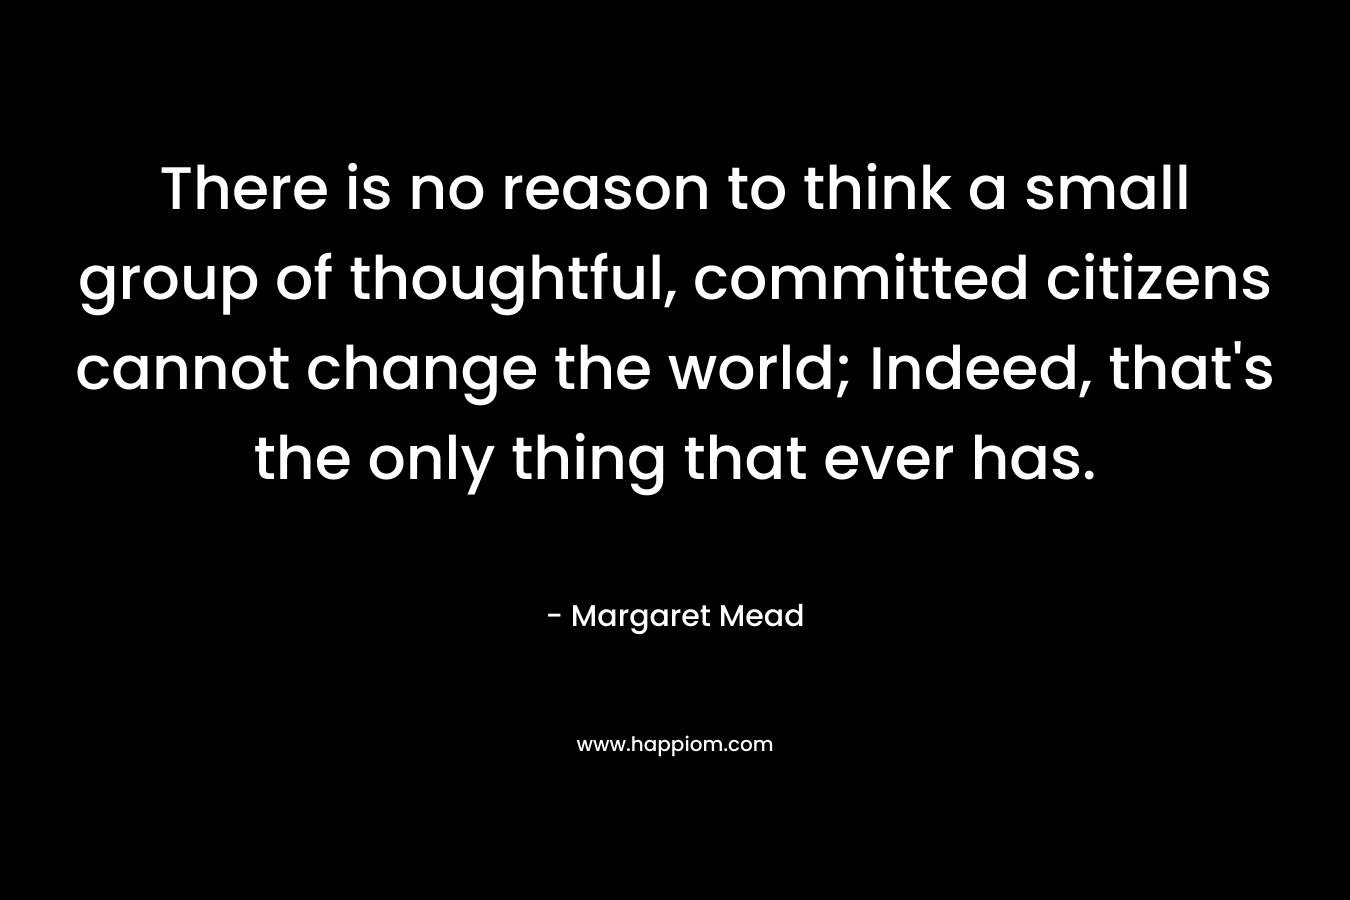 There is no reason to think a small group of thoughtful, committed citizens cannot change the world; Indeed, that's the only thing that ever has.